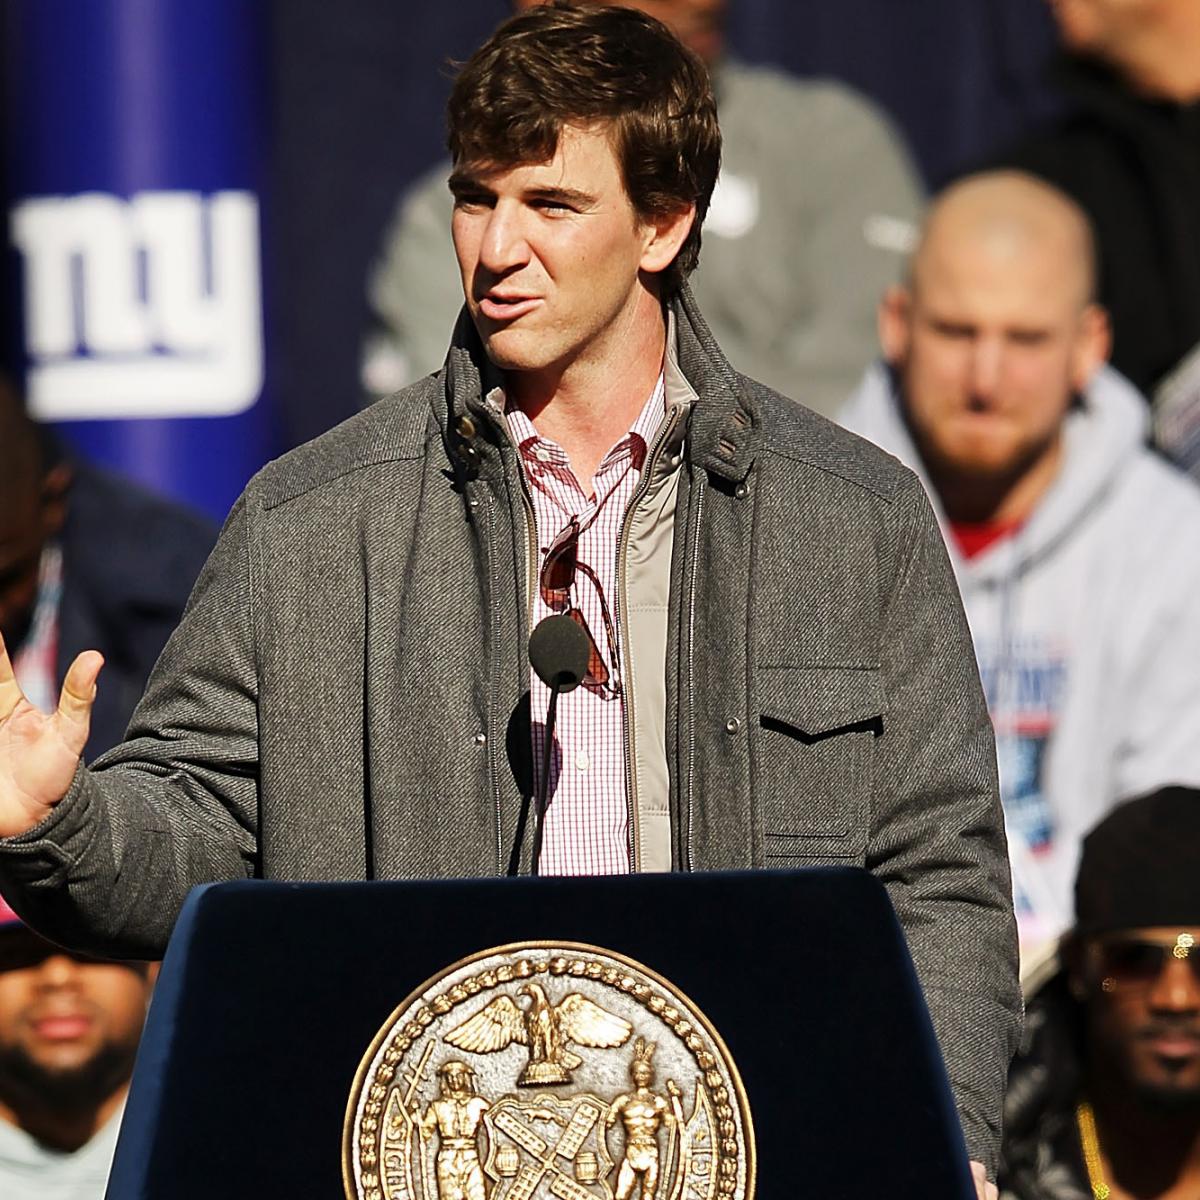 Eli Manning on SNL: Lack of Expectations Will Have Everyone Pleasantly